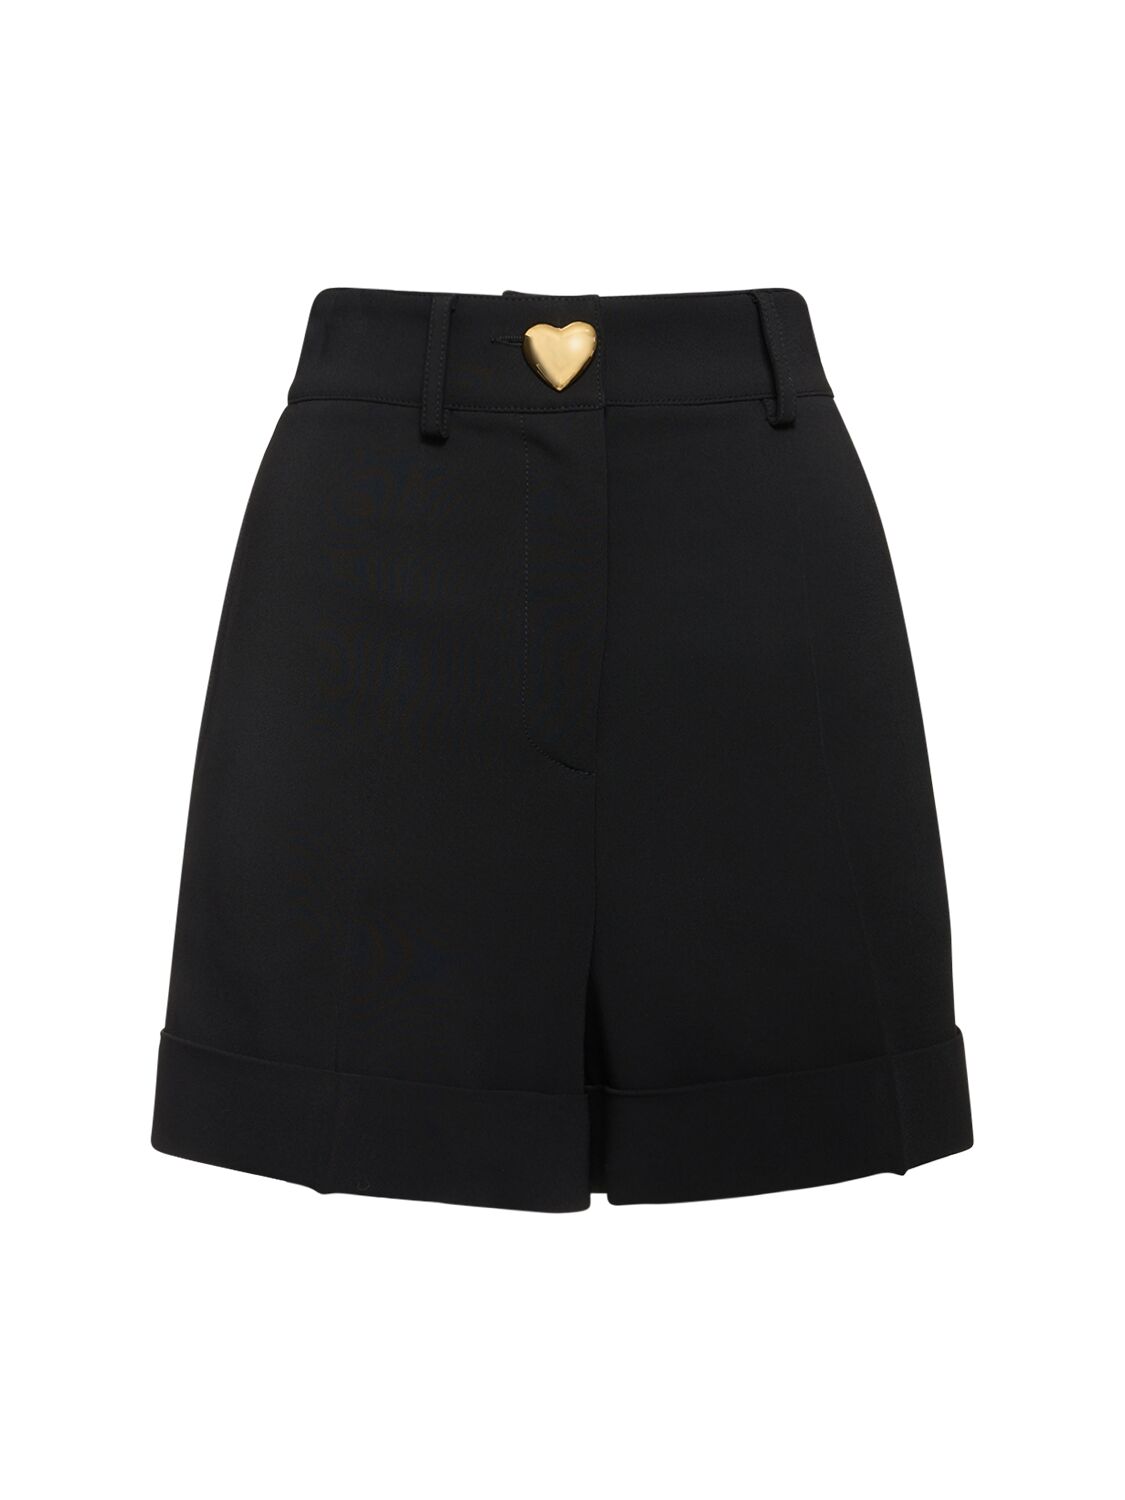 Moschino Viscose Cady Shorts W/ Heart Button In Black